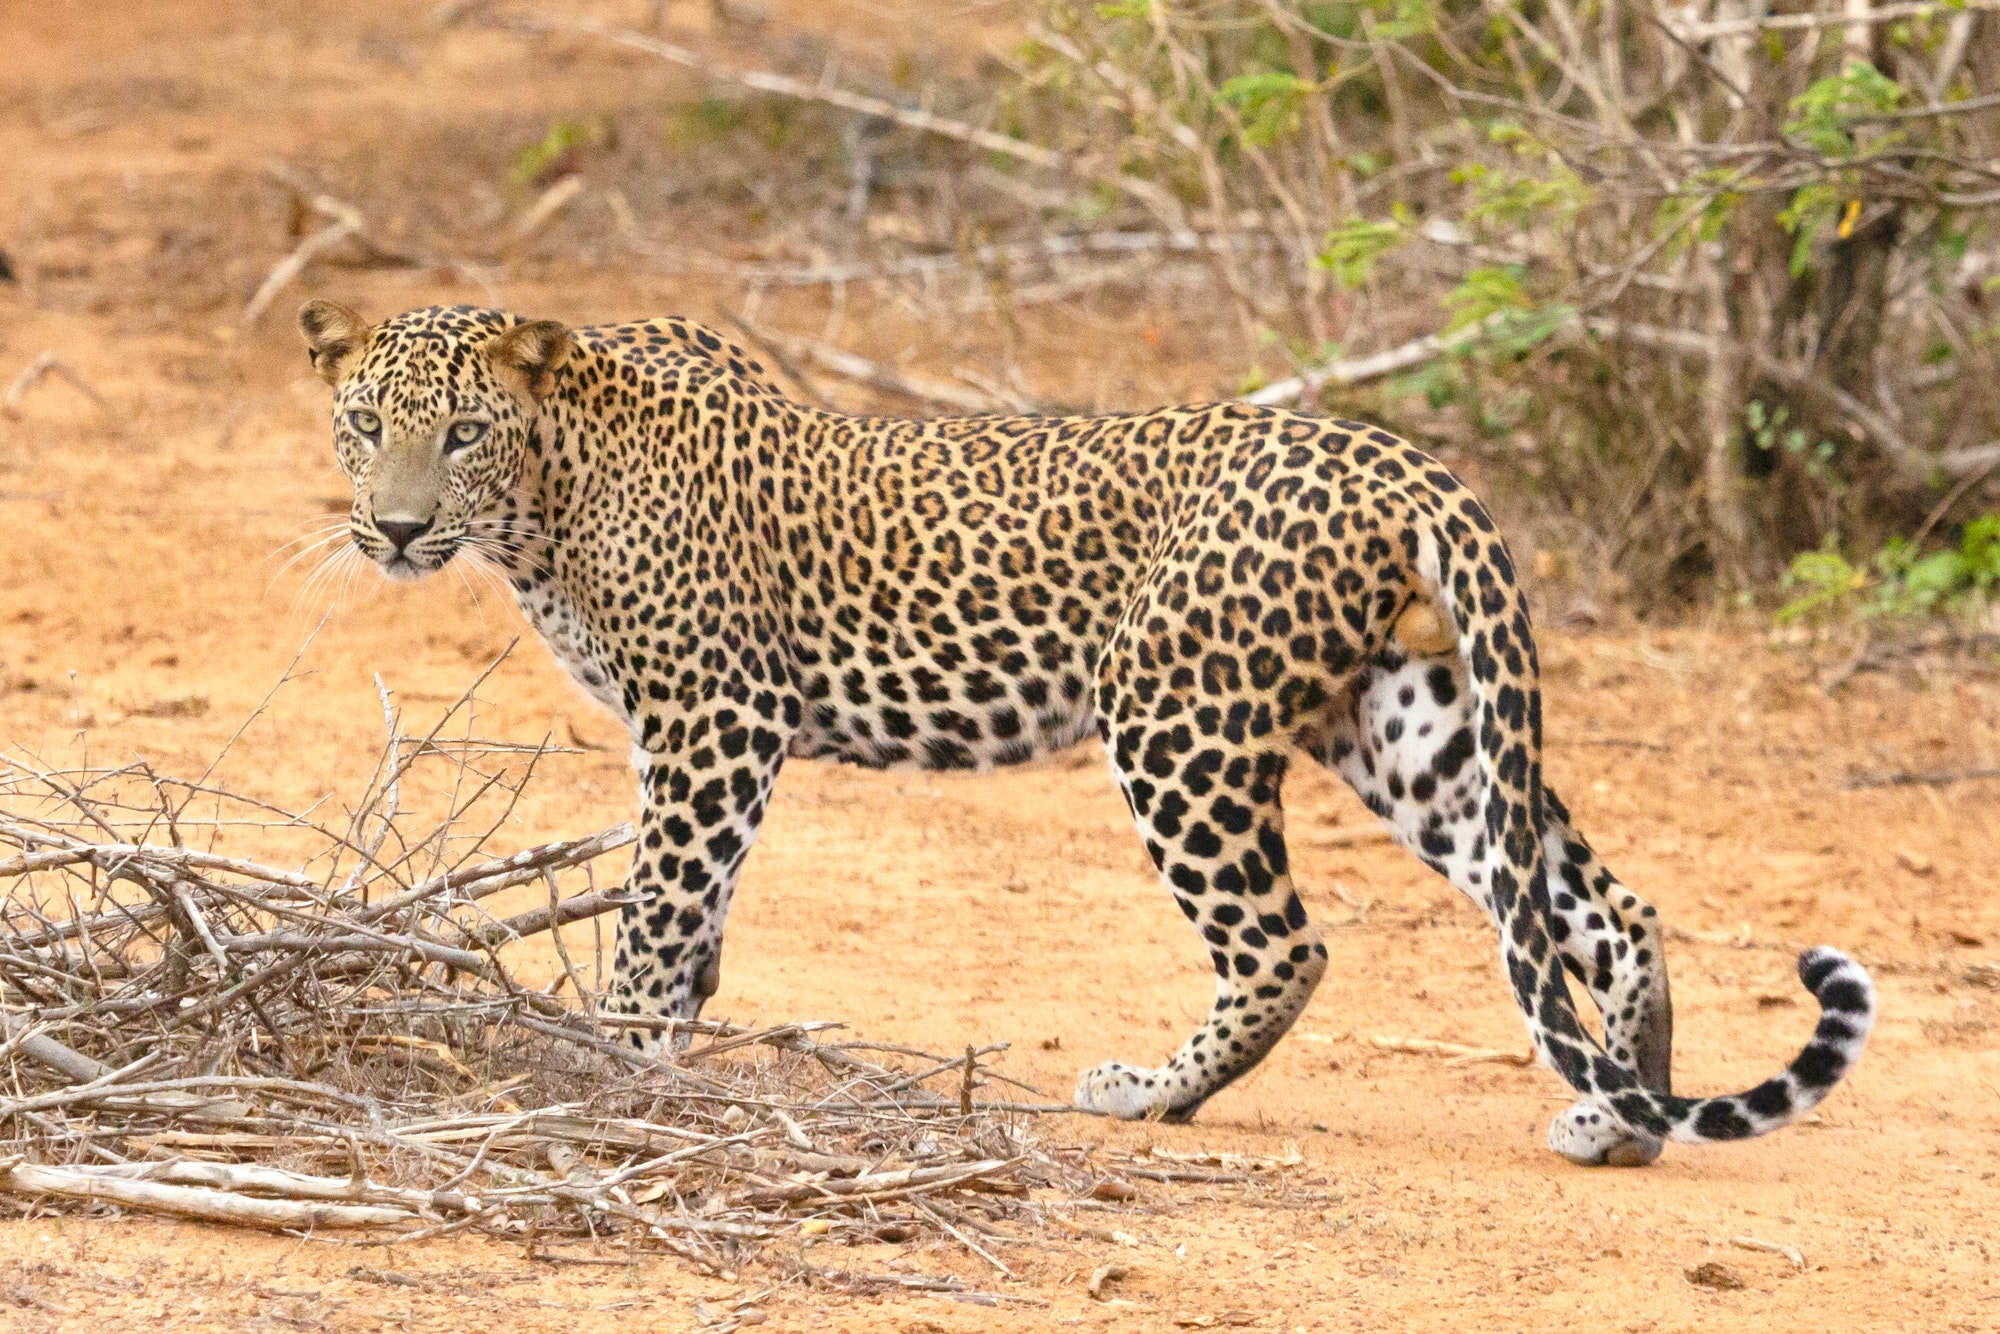 A leopard in india killed three children and is now being hunted by authorities.